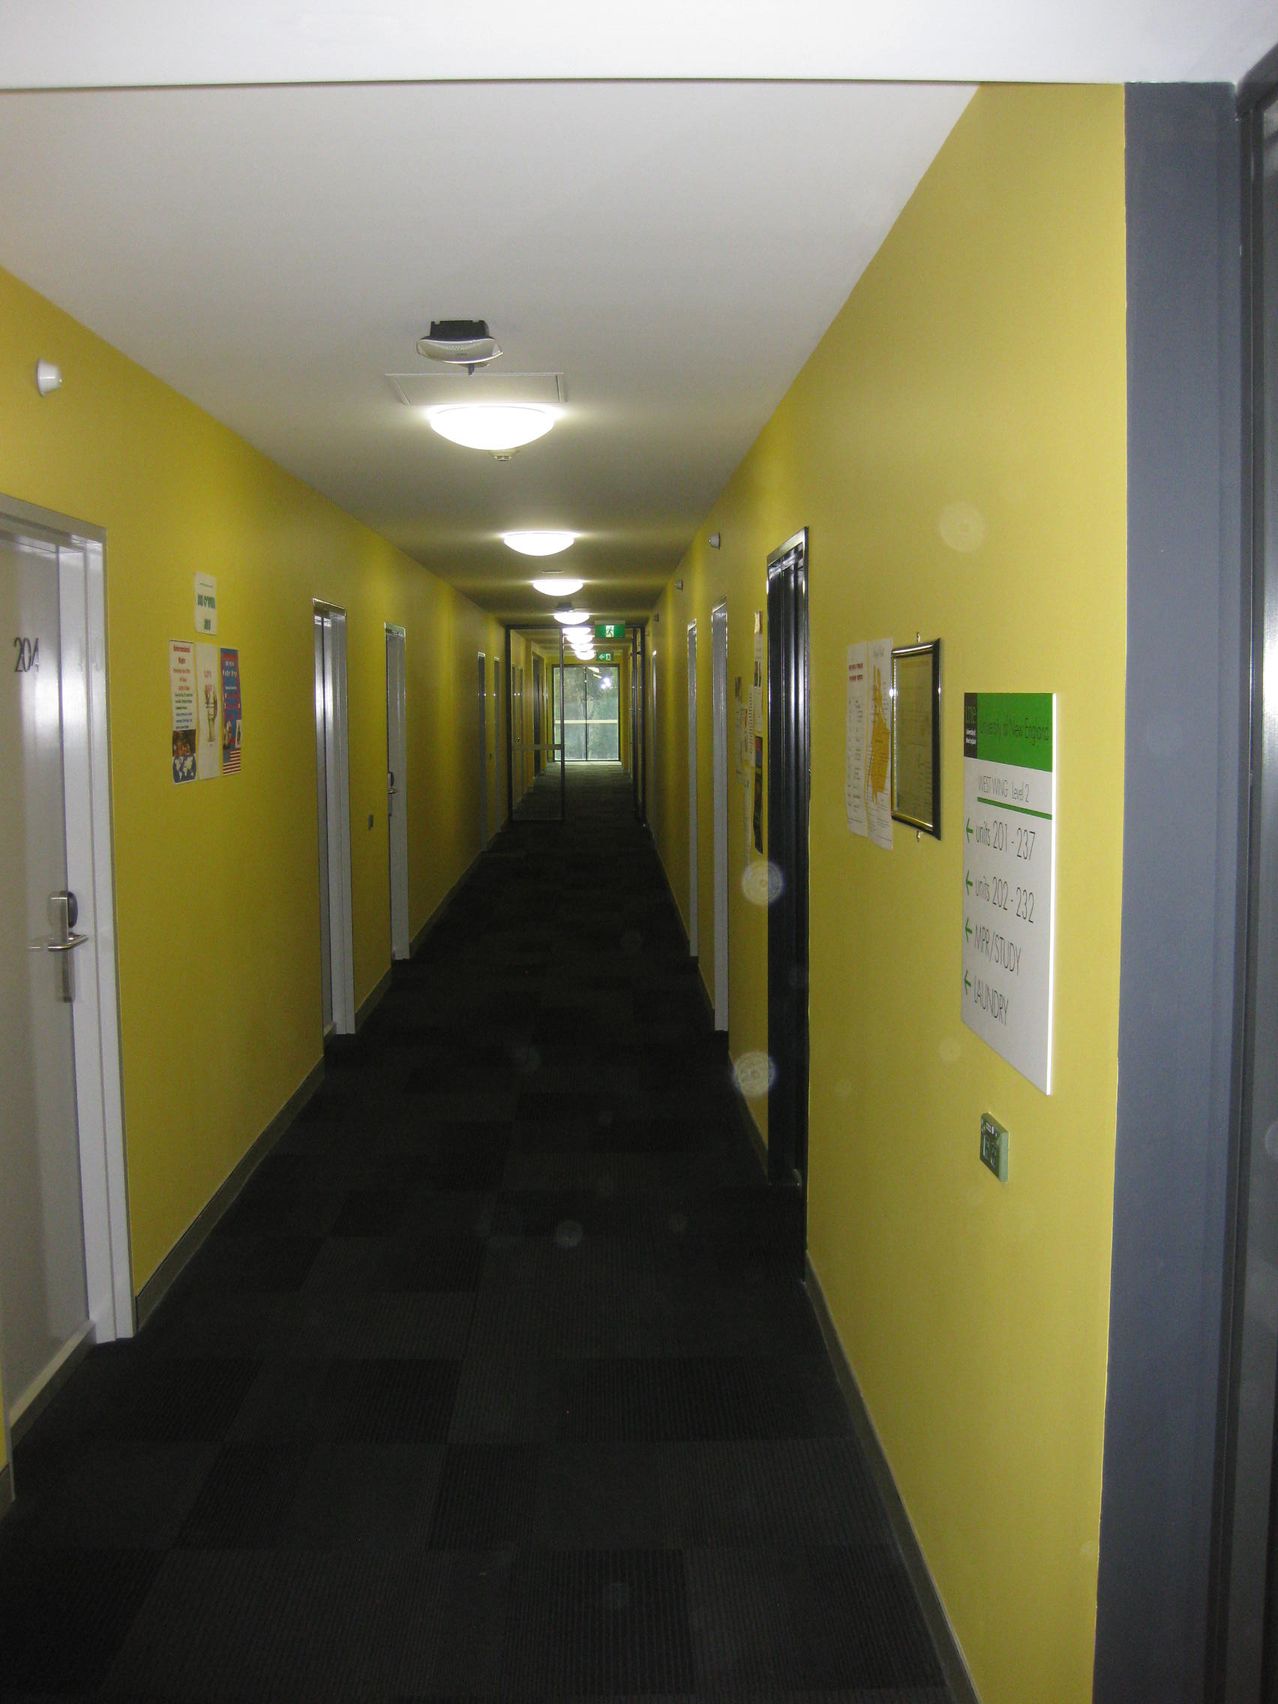 Close up of corridor with bright yellow walls